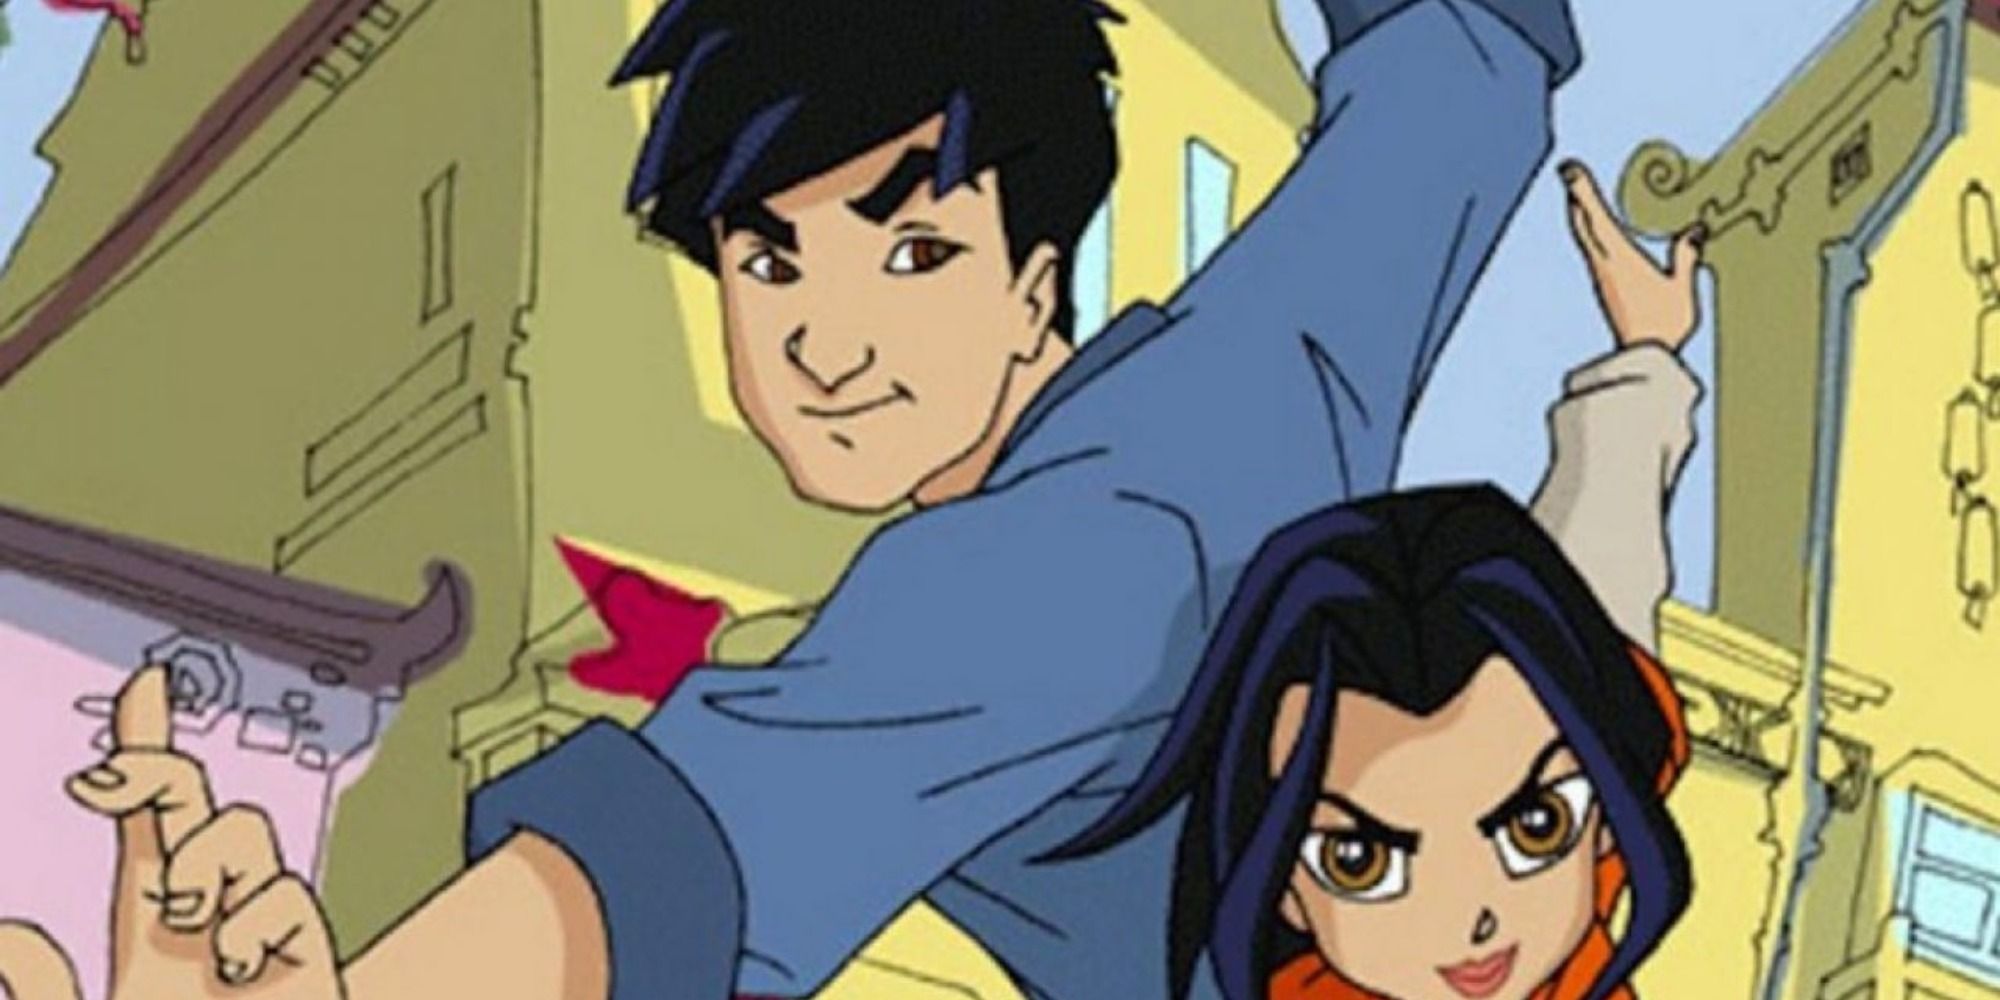 Jackie Chan Adventures two leads in the show